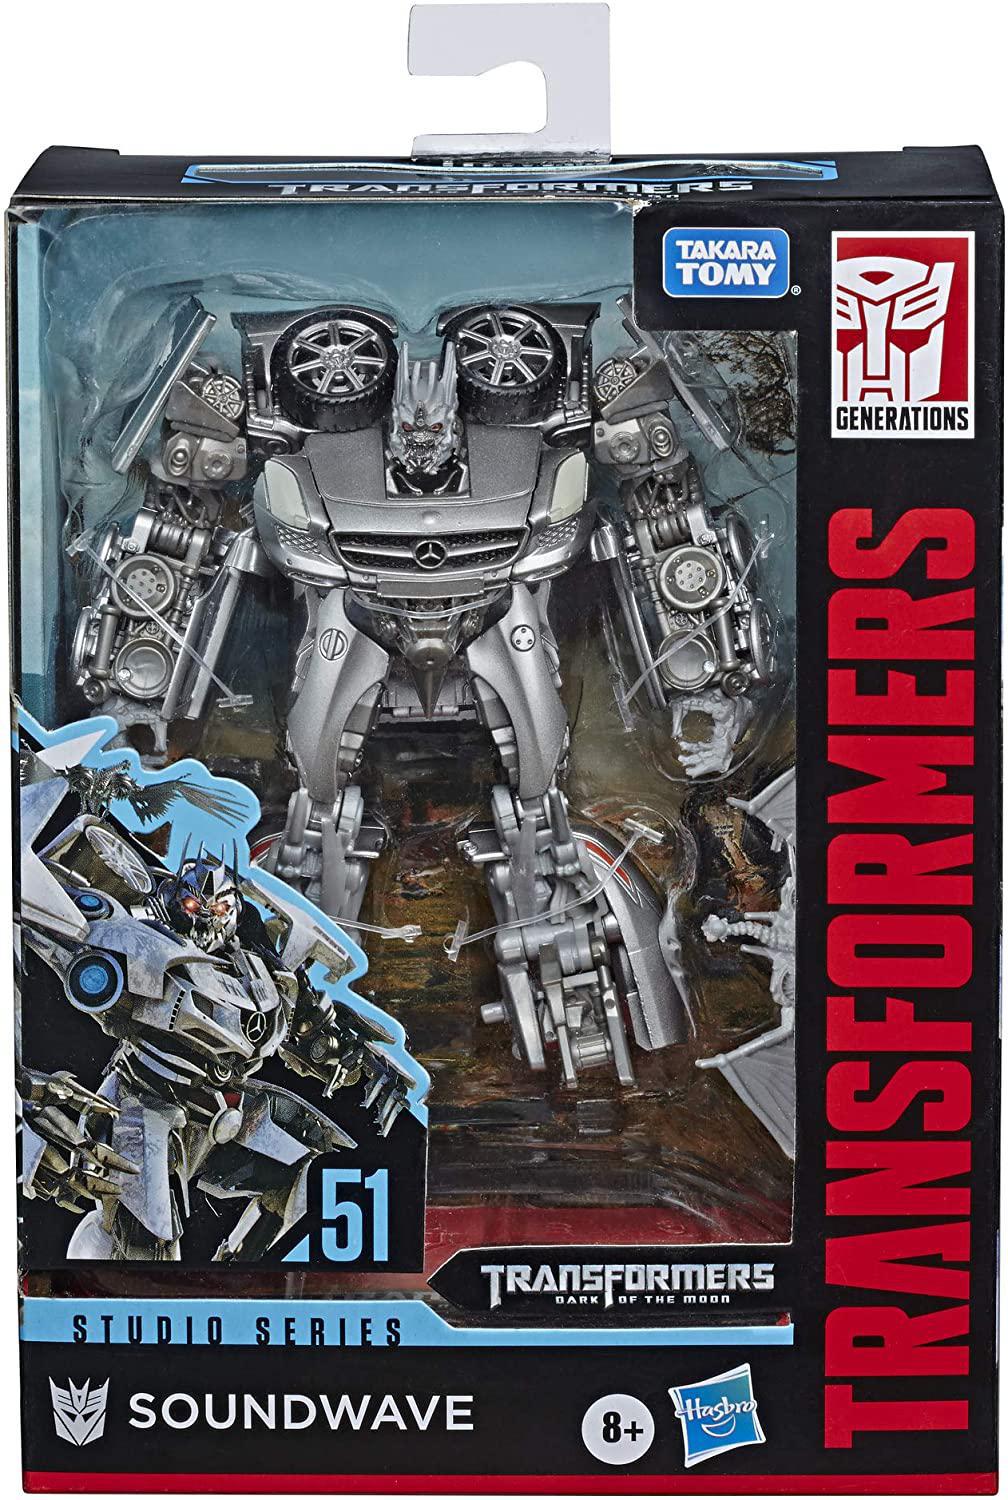 Transformers Toys Studio Series 51 Deluxe Class Dark of The Moon Movie Soundwave Action Figure